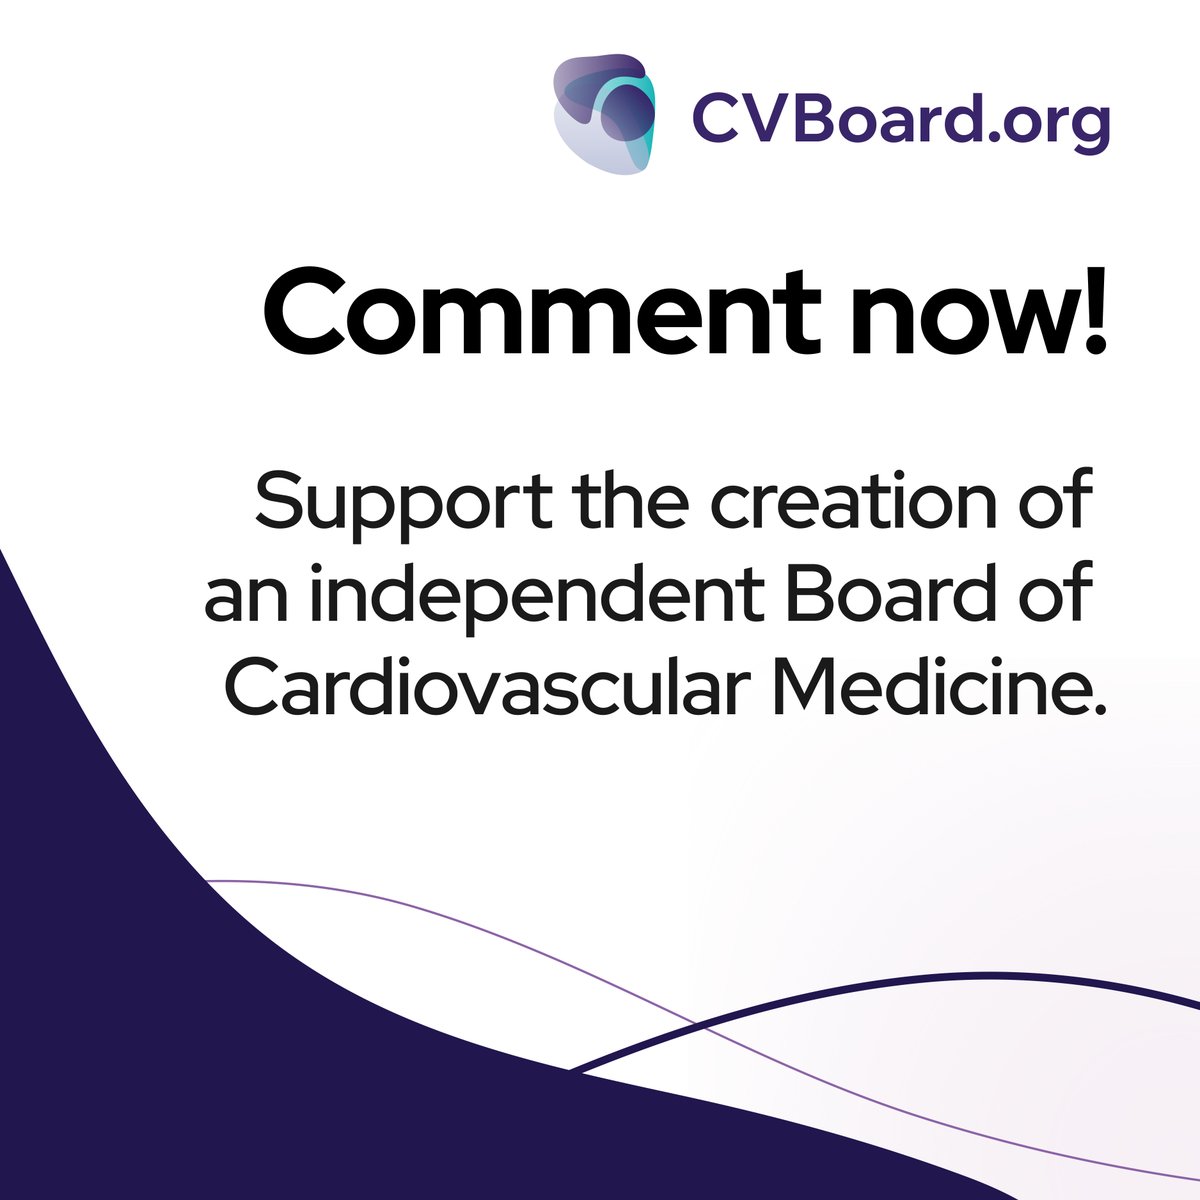 Share your support for a new, independent #CVBoard as part of the 90-day open comment period announced by ABMS. This is an important opportunity for the HF community to engage in the app review/approval process and provide insights into the benefits. CVBoard.org/get-involved/